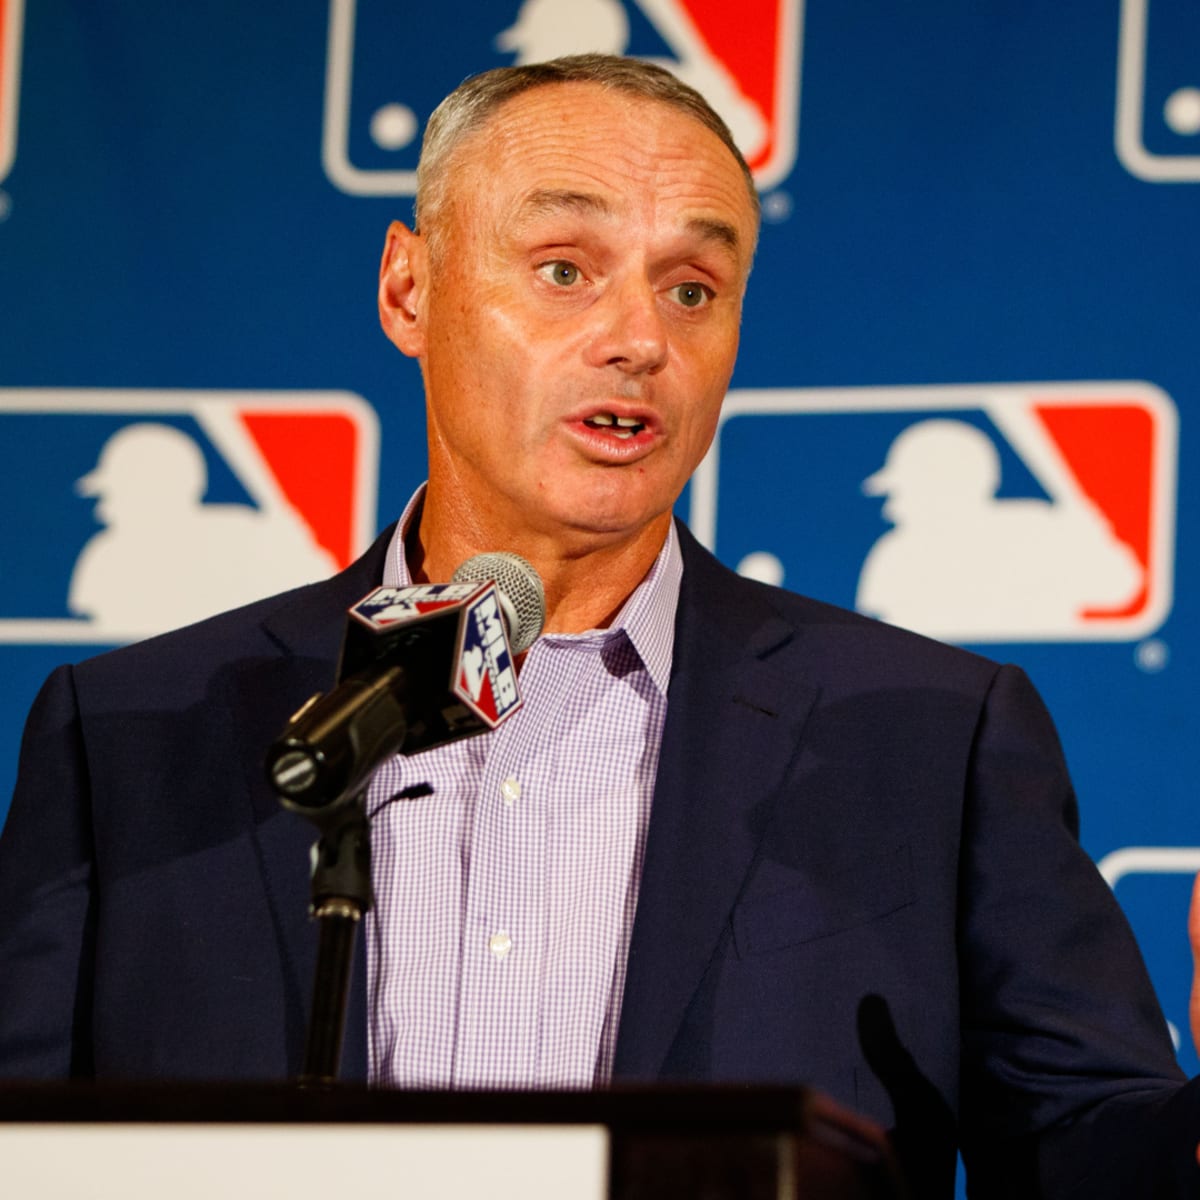 MLB wins court ruling forcing Diamond Sports to pay for local rights deals  - SportsPro